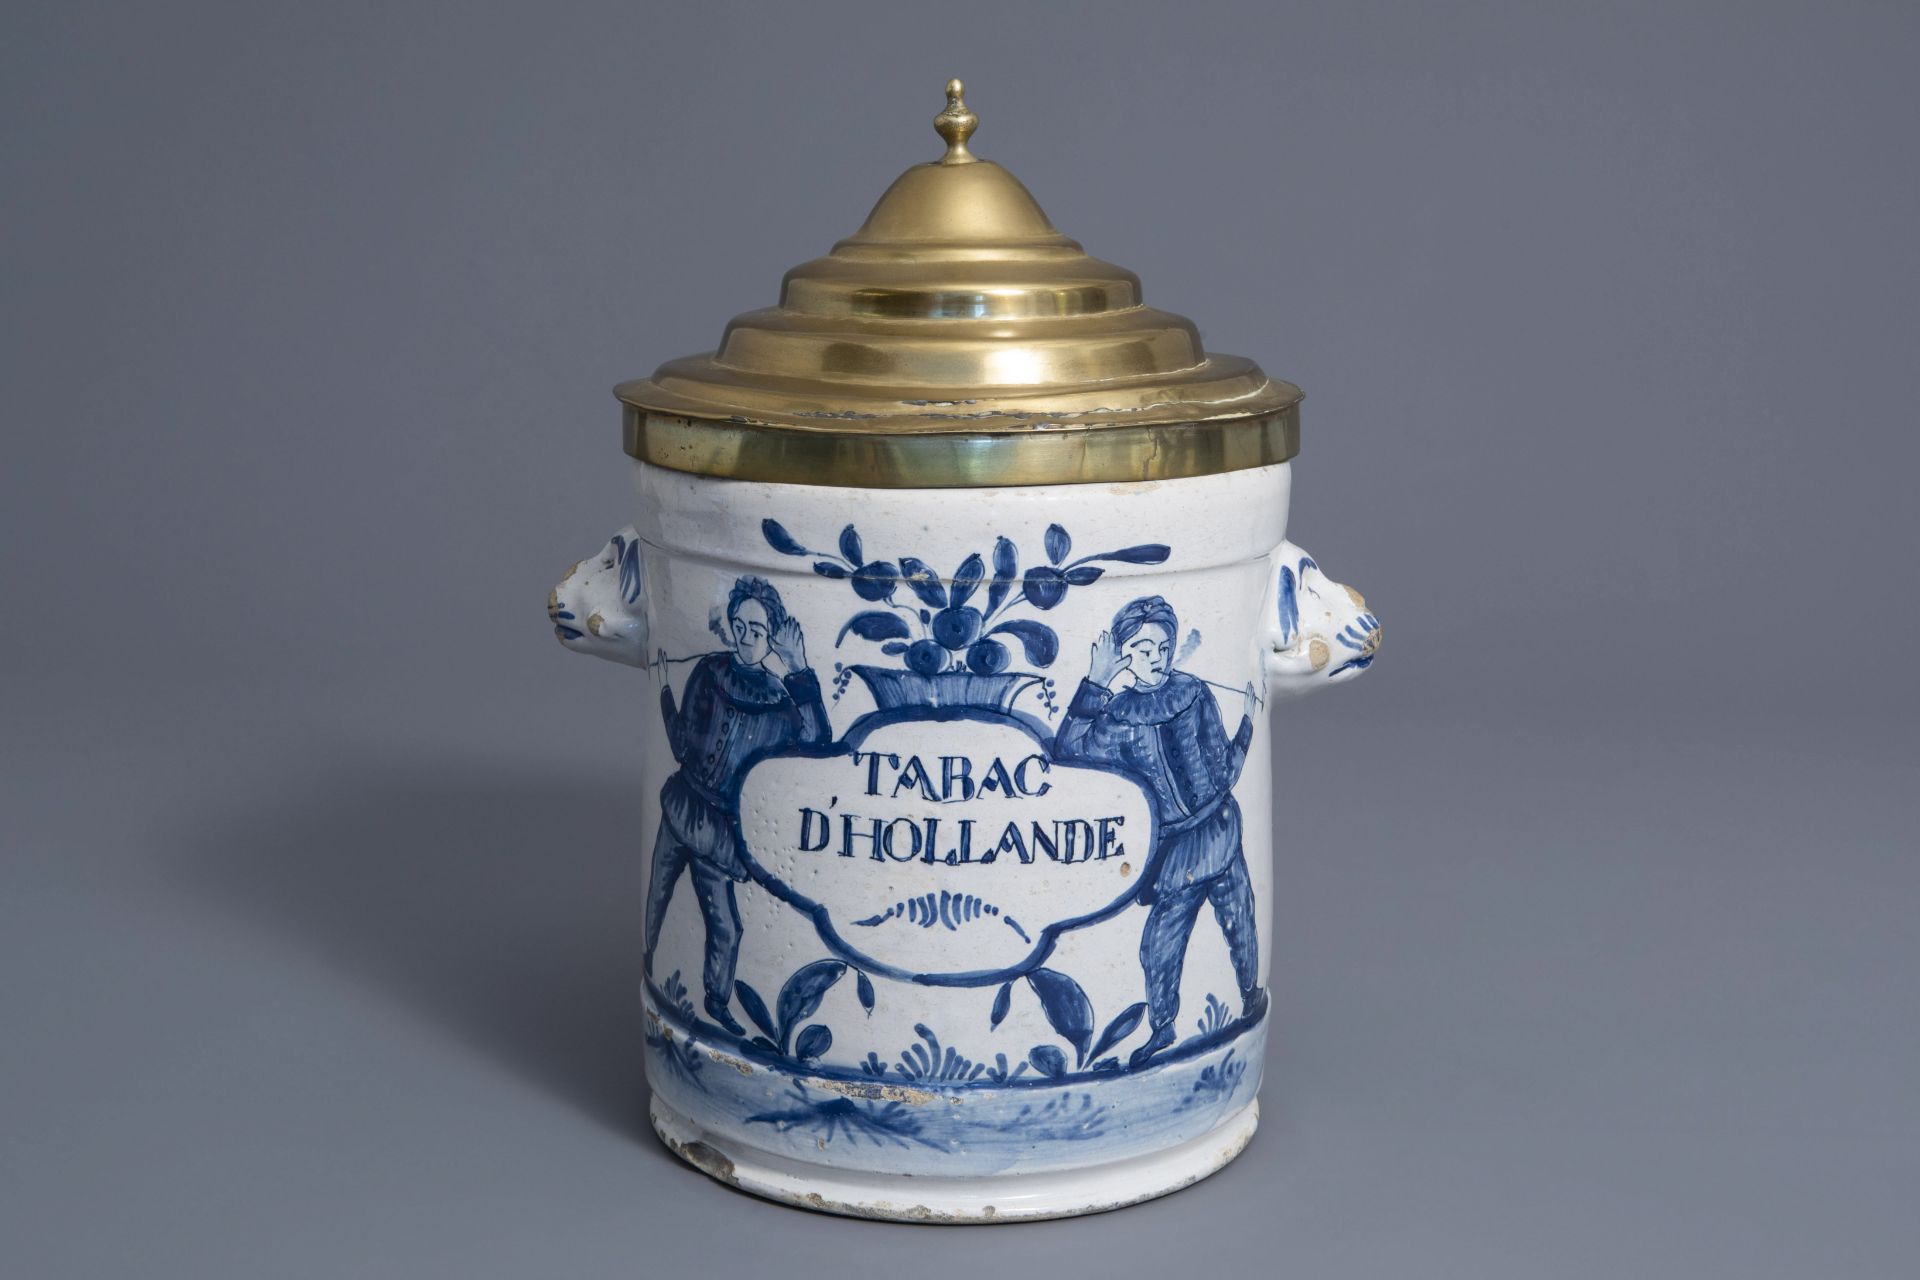 A Brussels brass covered blue and white faience 'Tabac d'Hollande' tobacco jar, late 18th C.